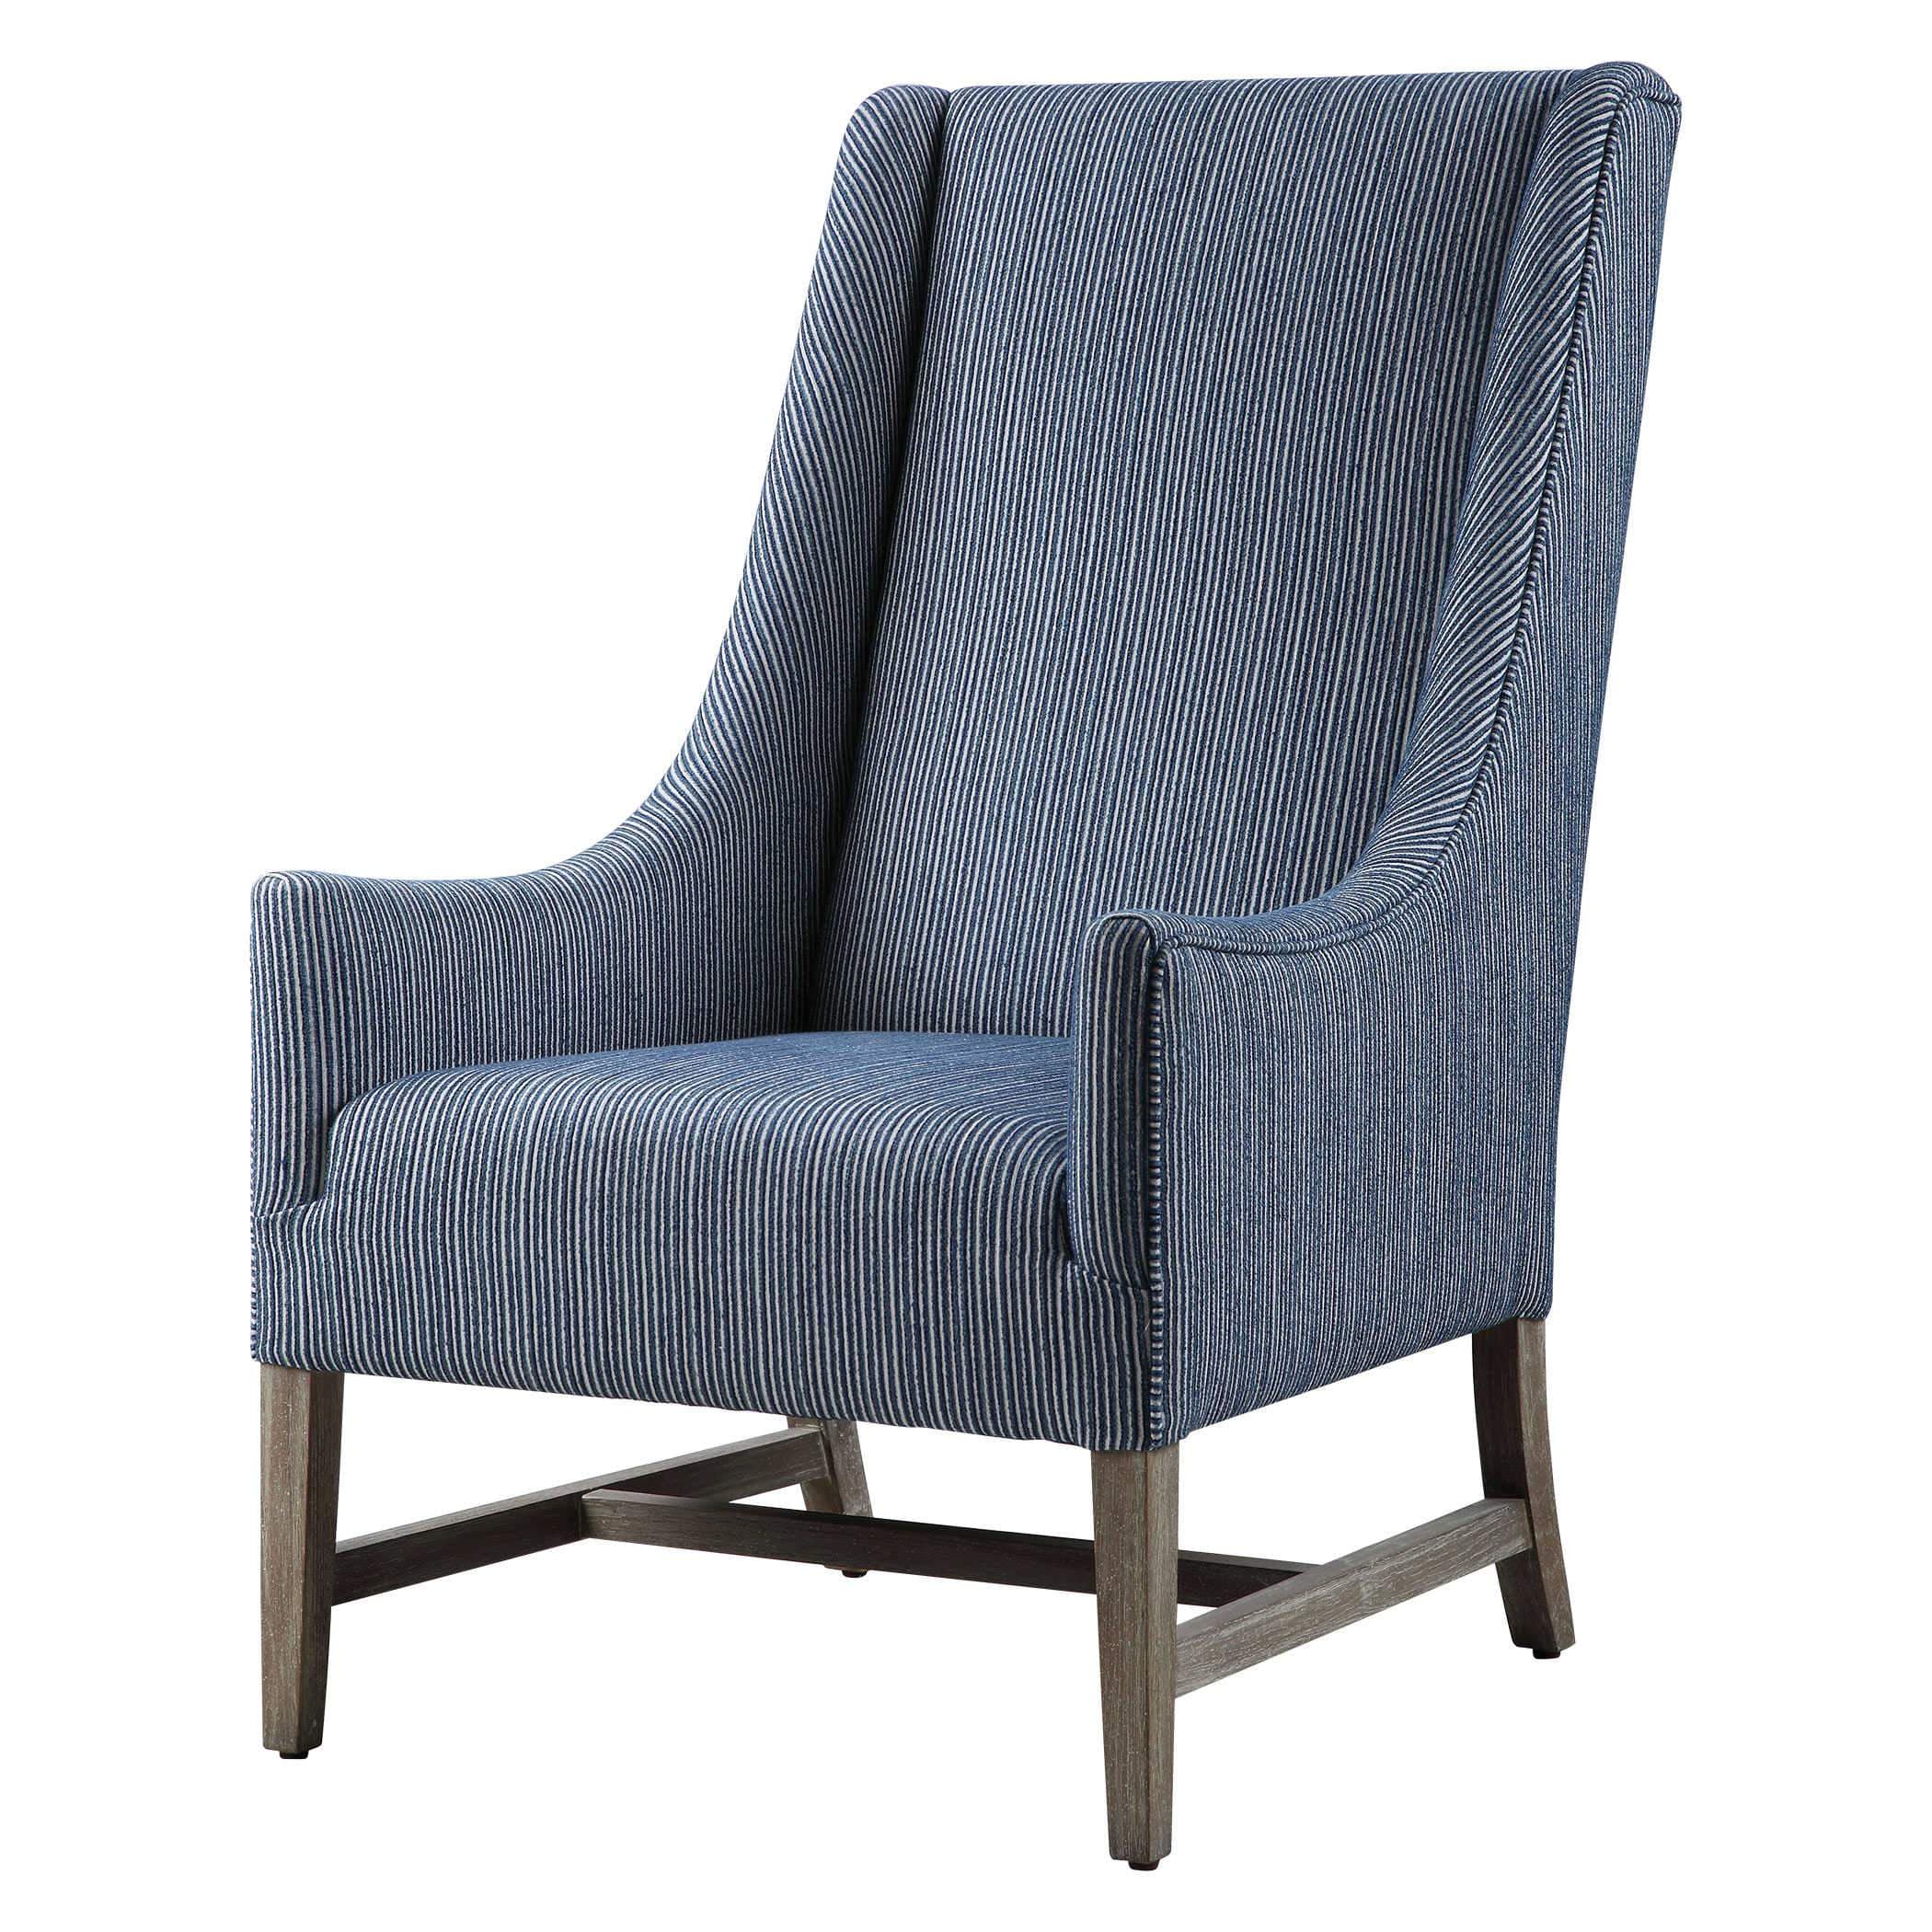 Galiot Costal Wingback Chair Uttermost